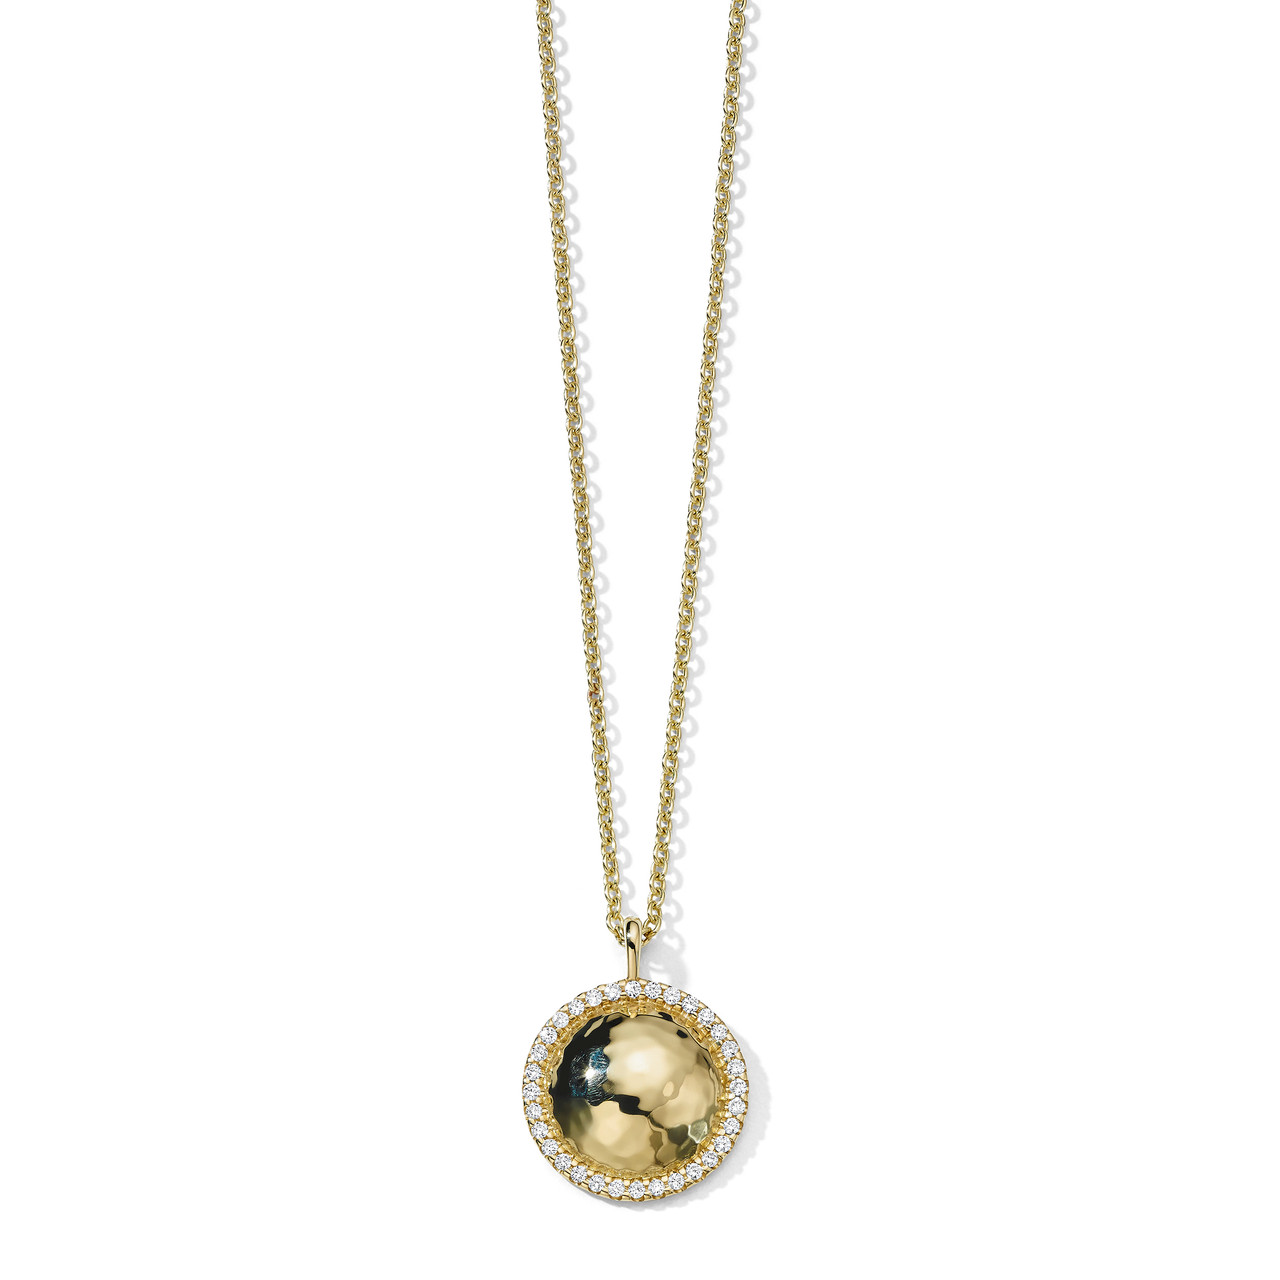 IPPOLITA Stardust Small Goddess Dome Necklace in 18K Gold with Diamonds